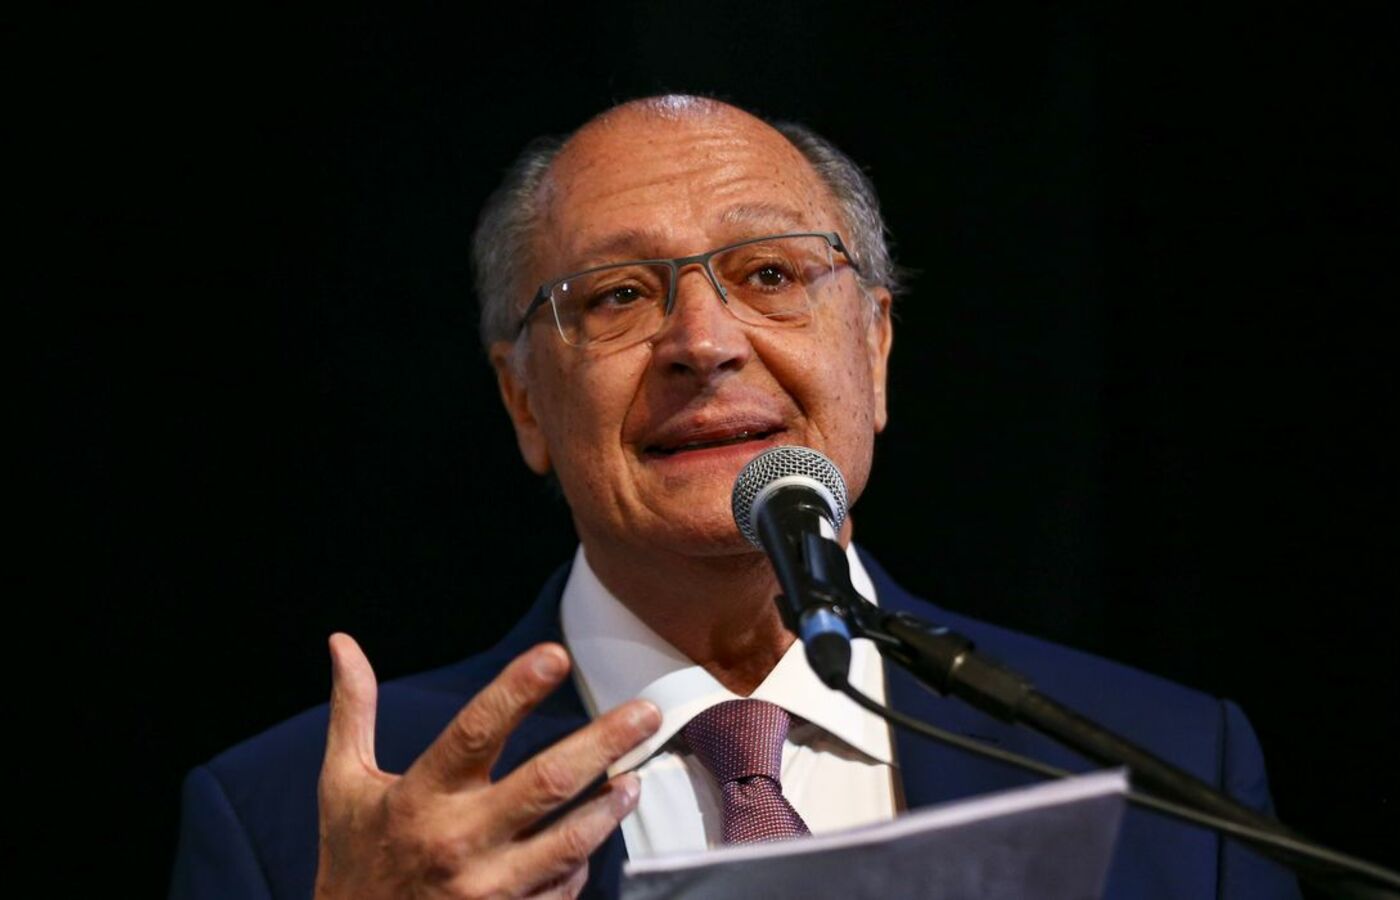 Alckmin says that voting on the tax reform should take place in the first half of 2023